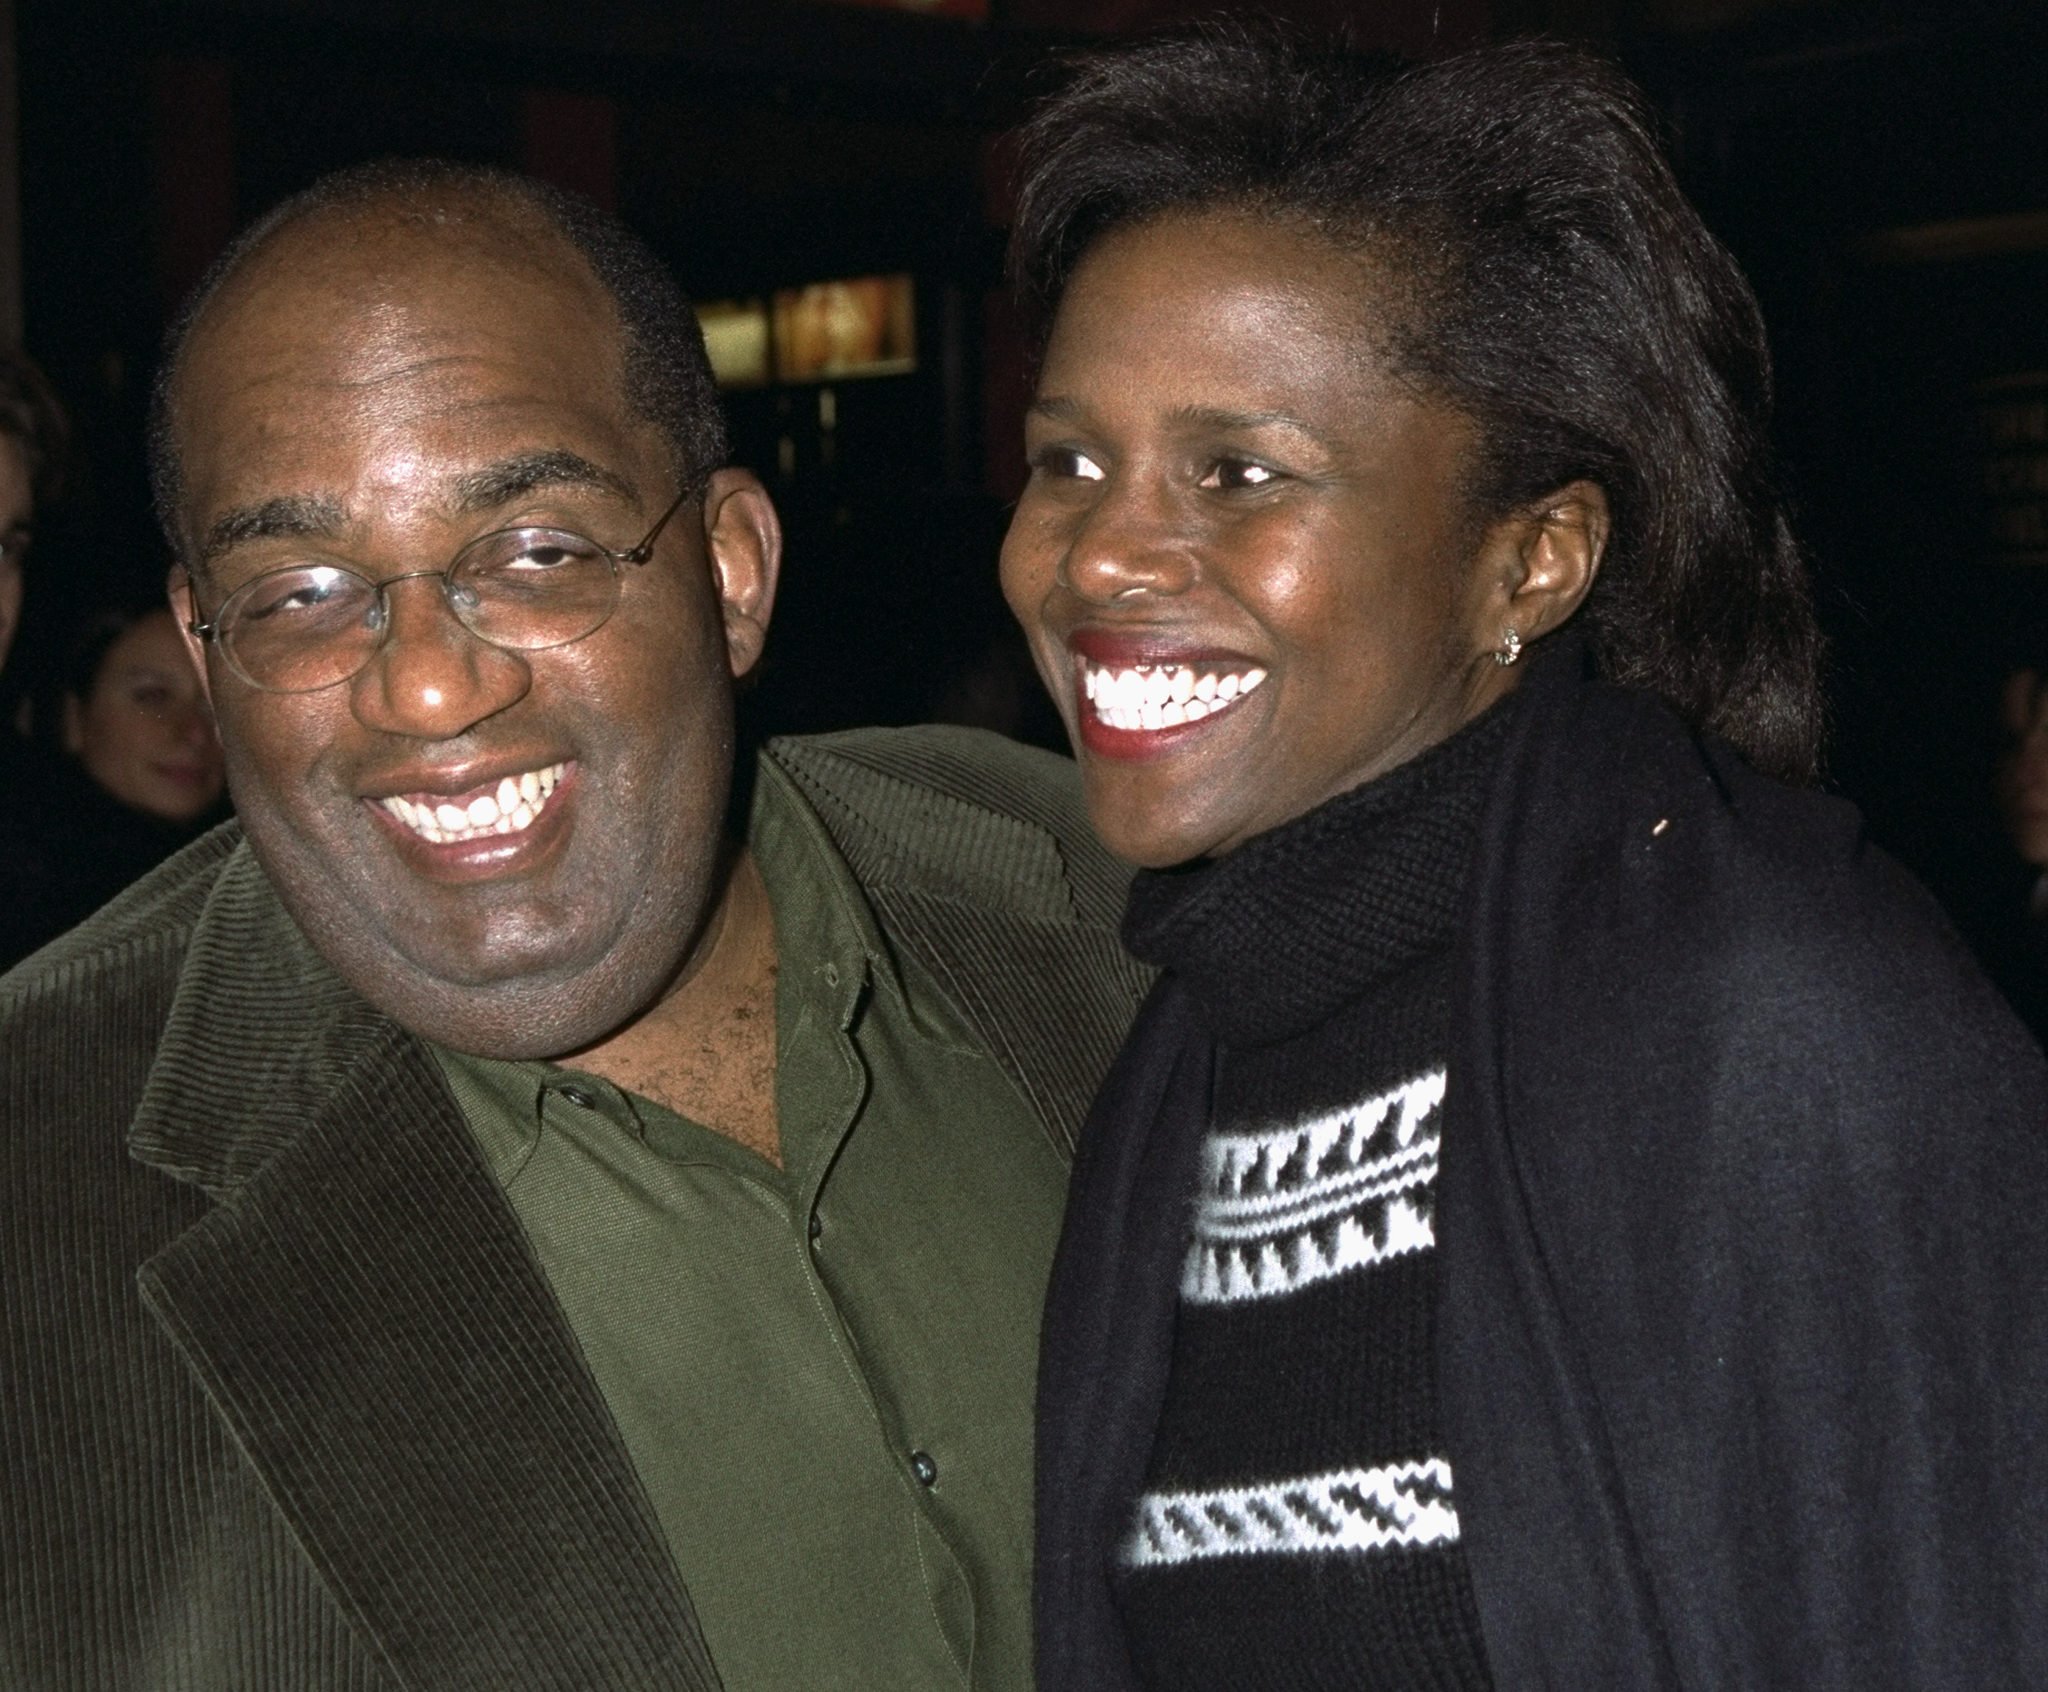 Al Roker and Deborah Roberts at the premiere of the movie "The Cider House Rules" on November 15, 1999. | Source: Getty Images